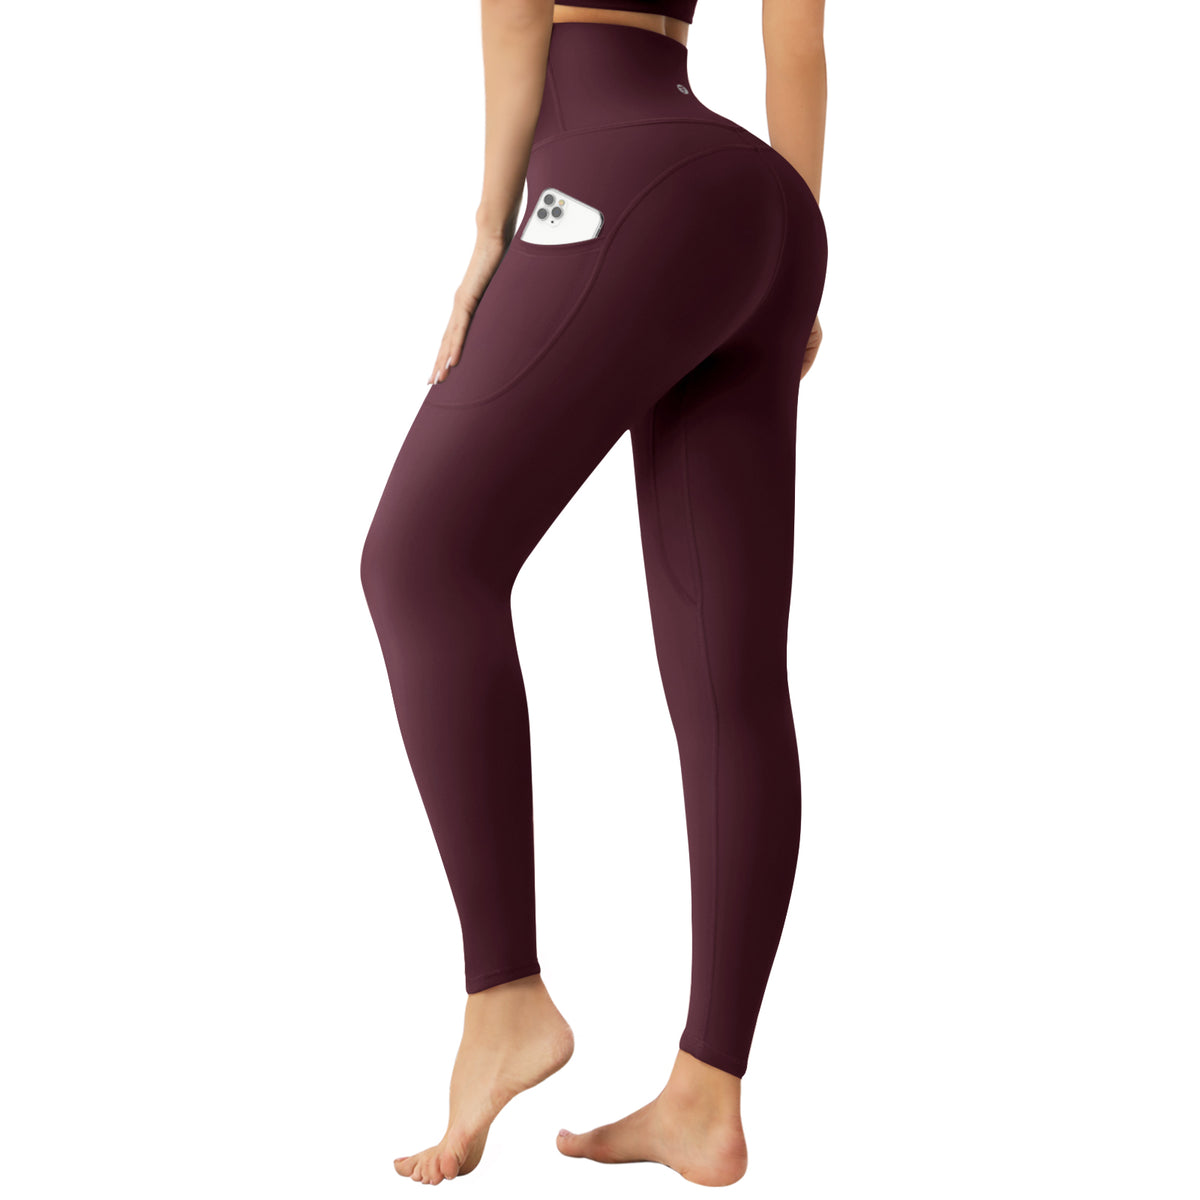 WOMEN'S HIGH WAIST LEGGINGS WITH POCKET Y01 - CABRALLY